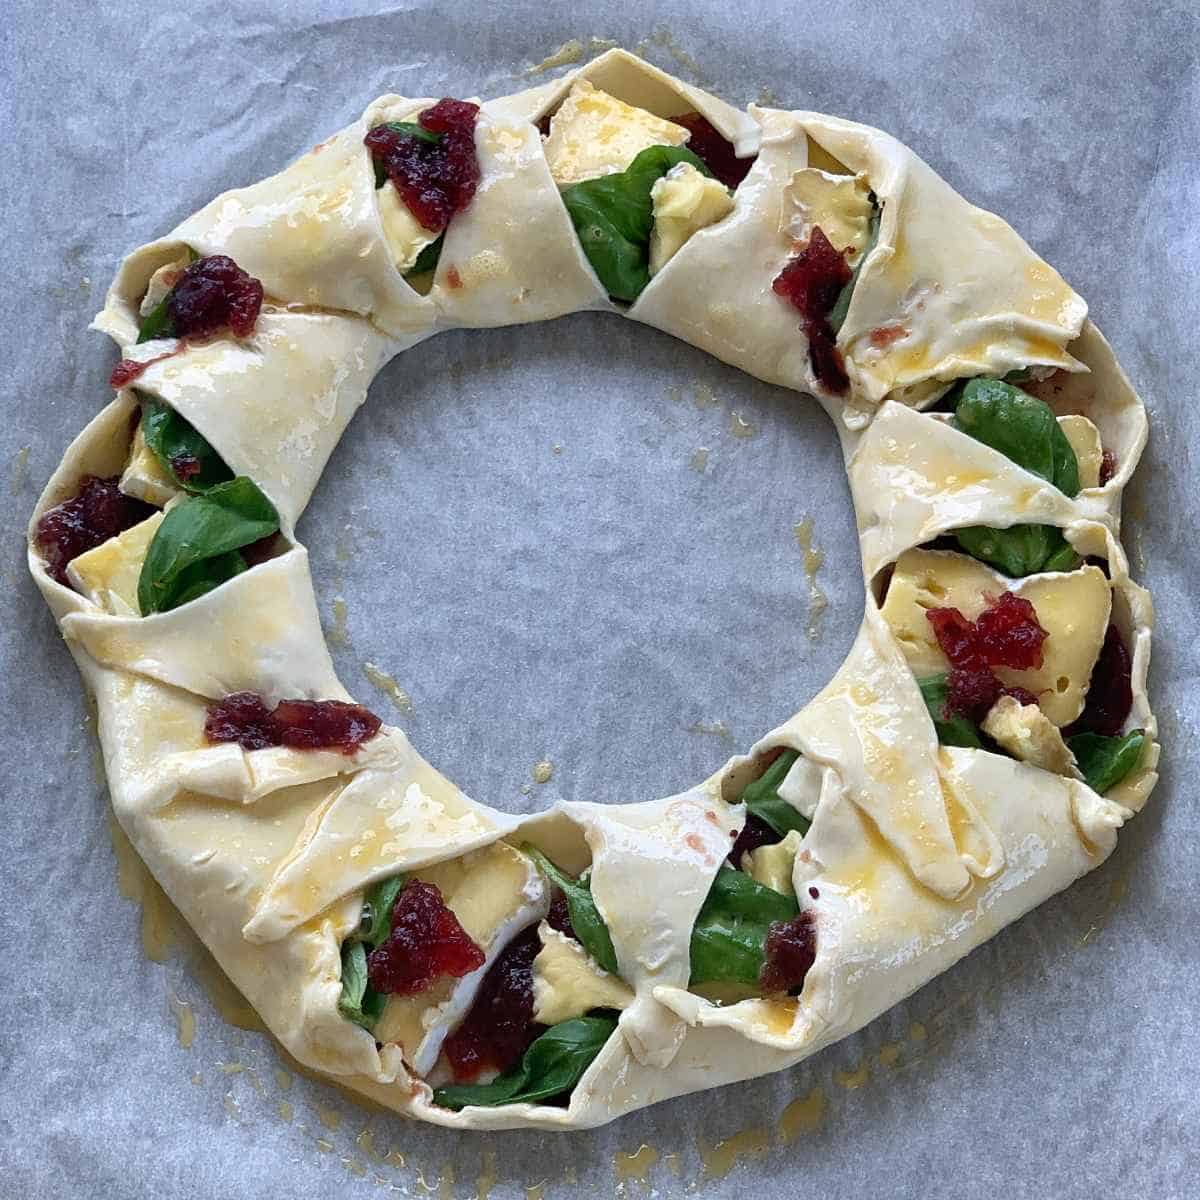 Uncooked but assembled brie and cranberry wreath sitting on a line baking try